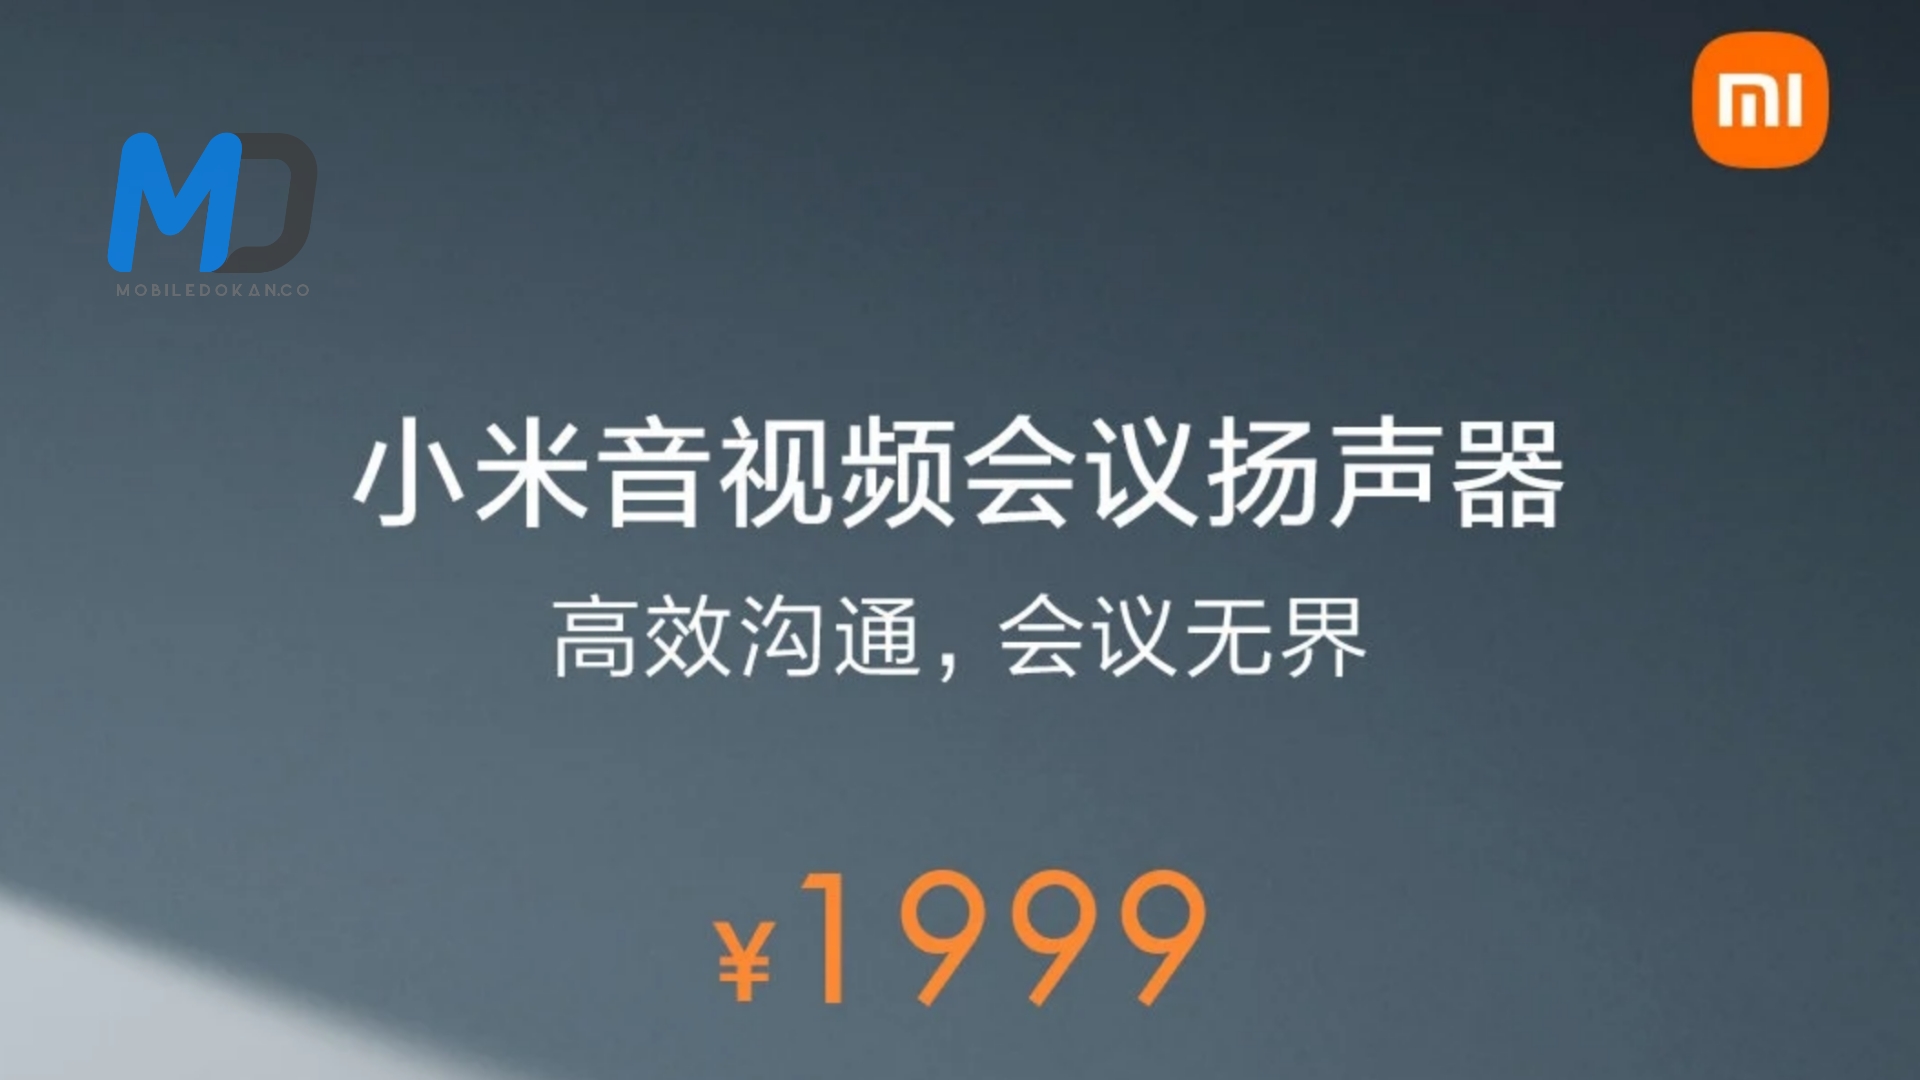 Xiaomi Audio and Video Conference Speaker priced at 1,999 yuan